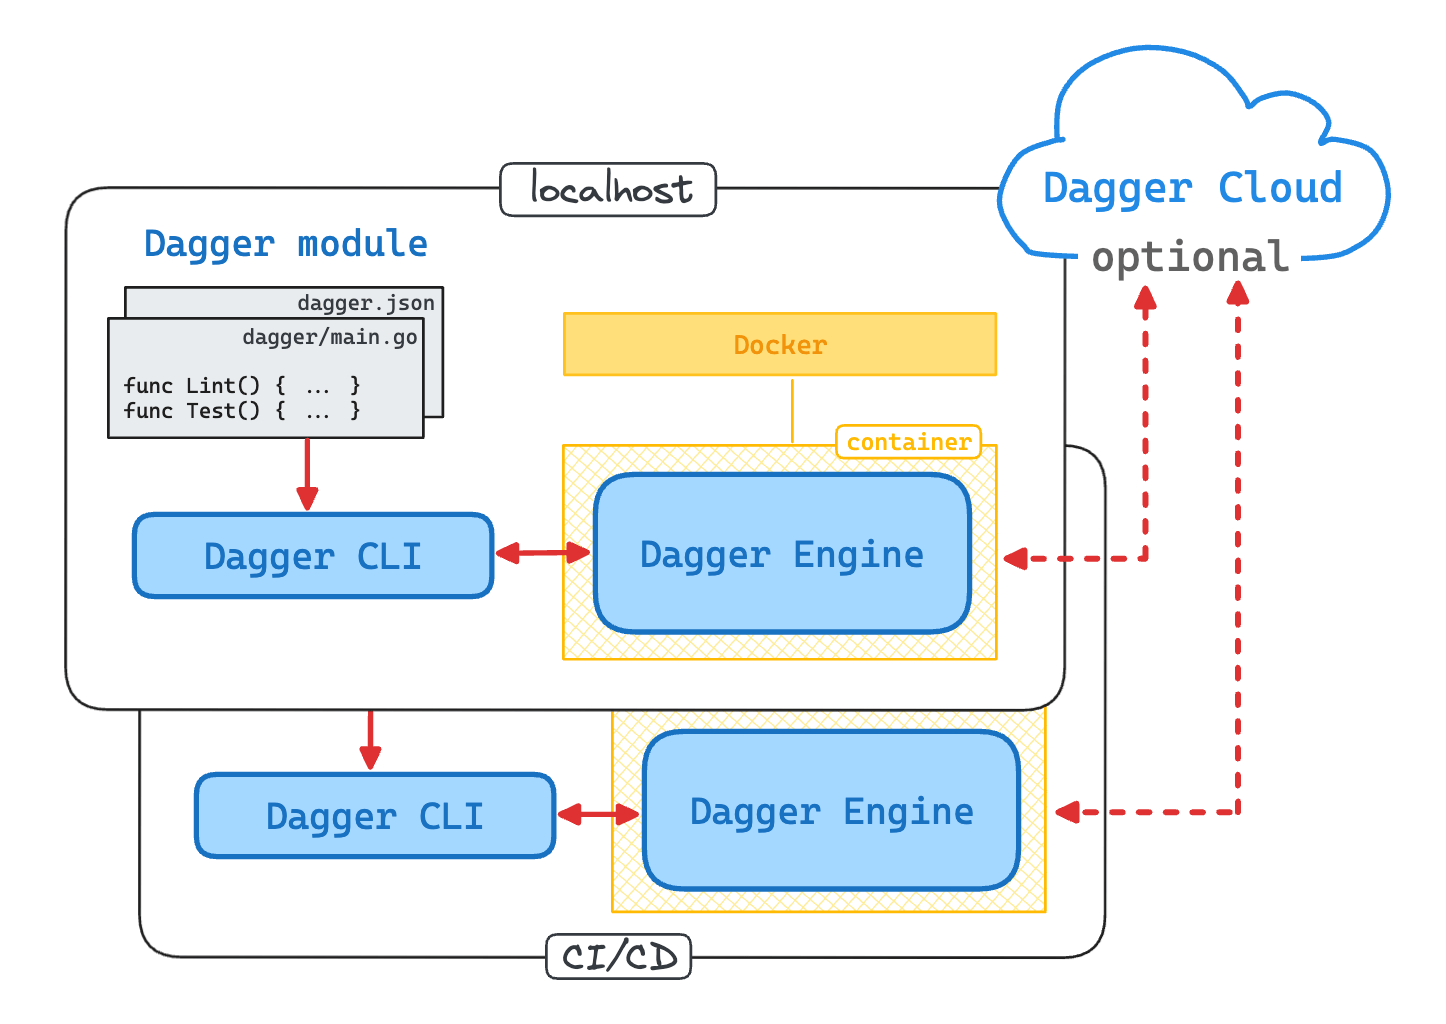 Dagger playground: A 4-in-1 playground (Docker, Podman, containerd, and Kubernetes hosts) to experiment with Dagger - a powerful development workflow automation engine.